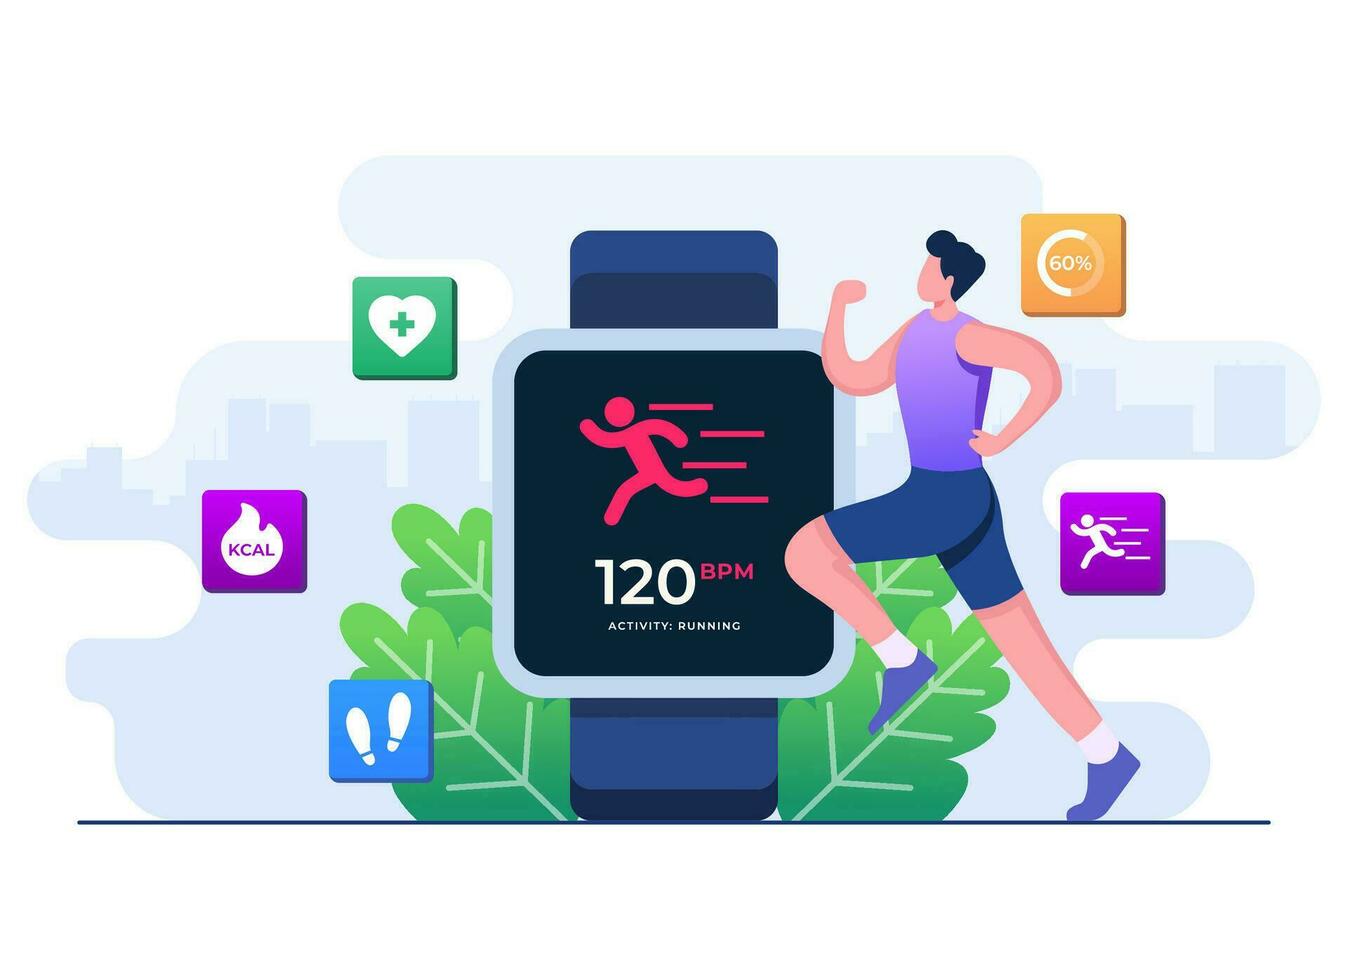 Runner monitoring his heart rate in smartwatch, Workout, Fitness and health concept, Fitness app, wrist-worn device, Training, Sports exercises vector